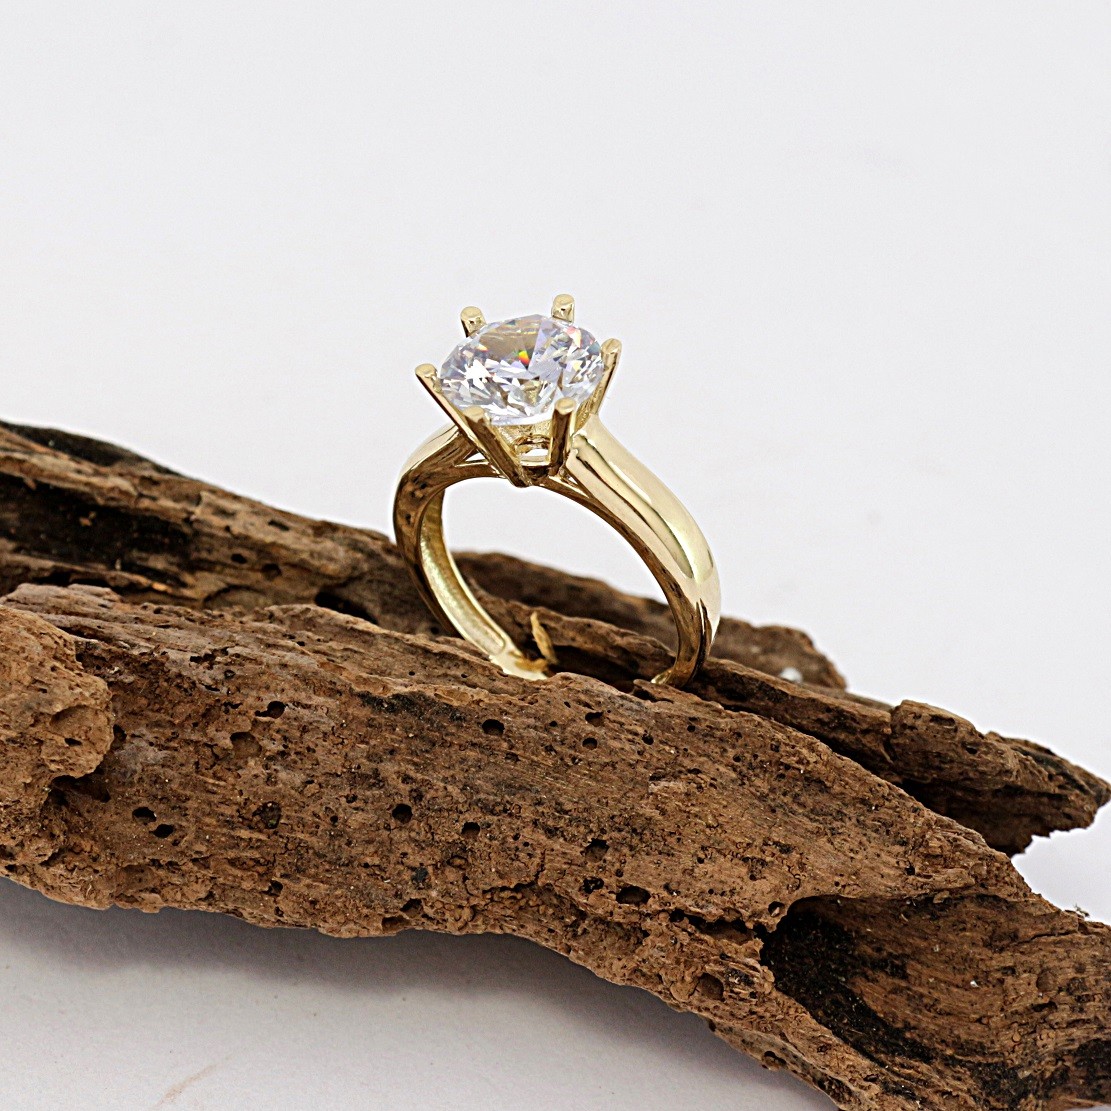  Gold Solitaire Ring